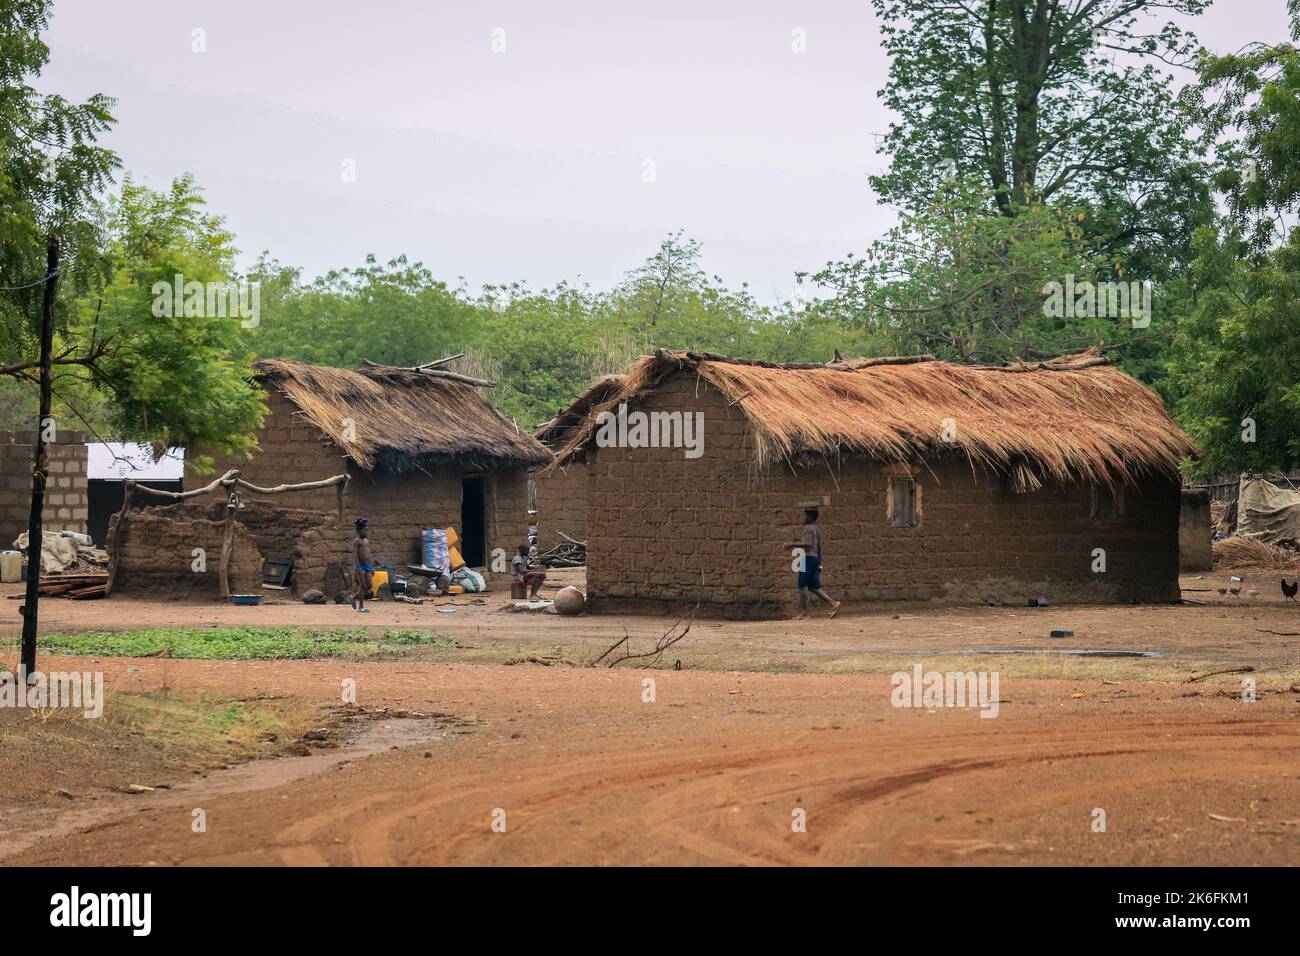 Traditional African Buildings made from Clay and Straw in Ghana village, West Africa Stock Photo